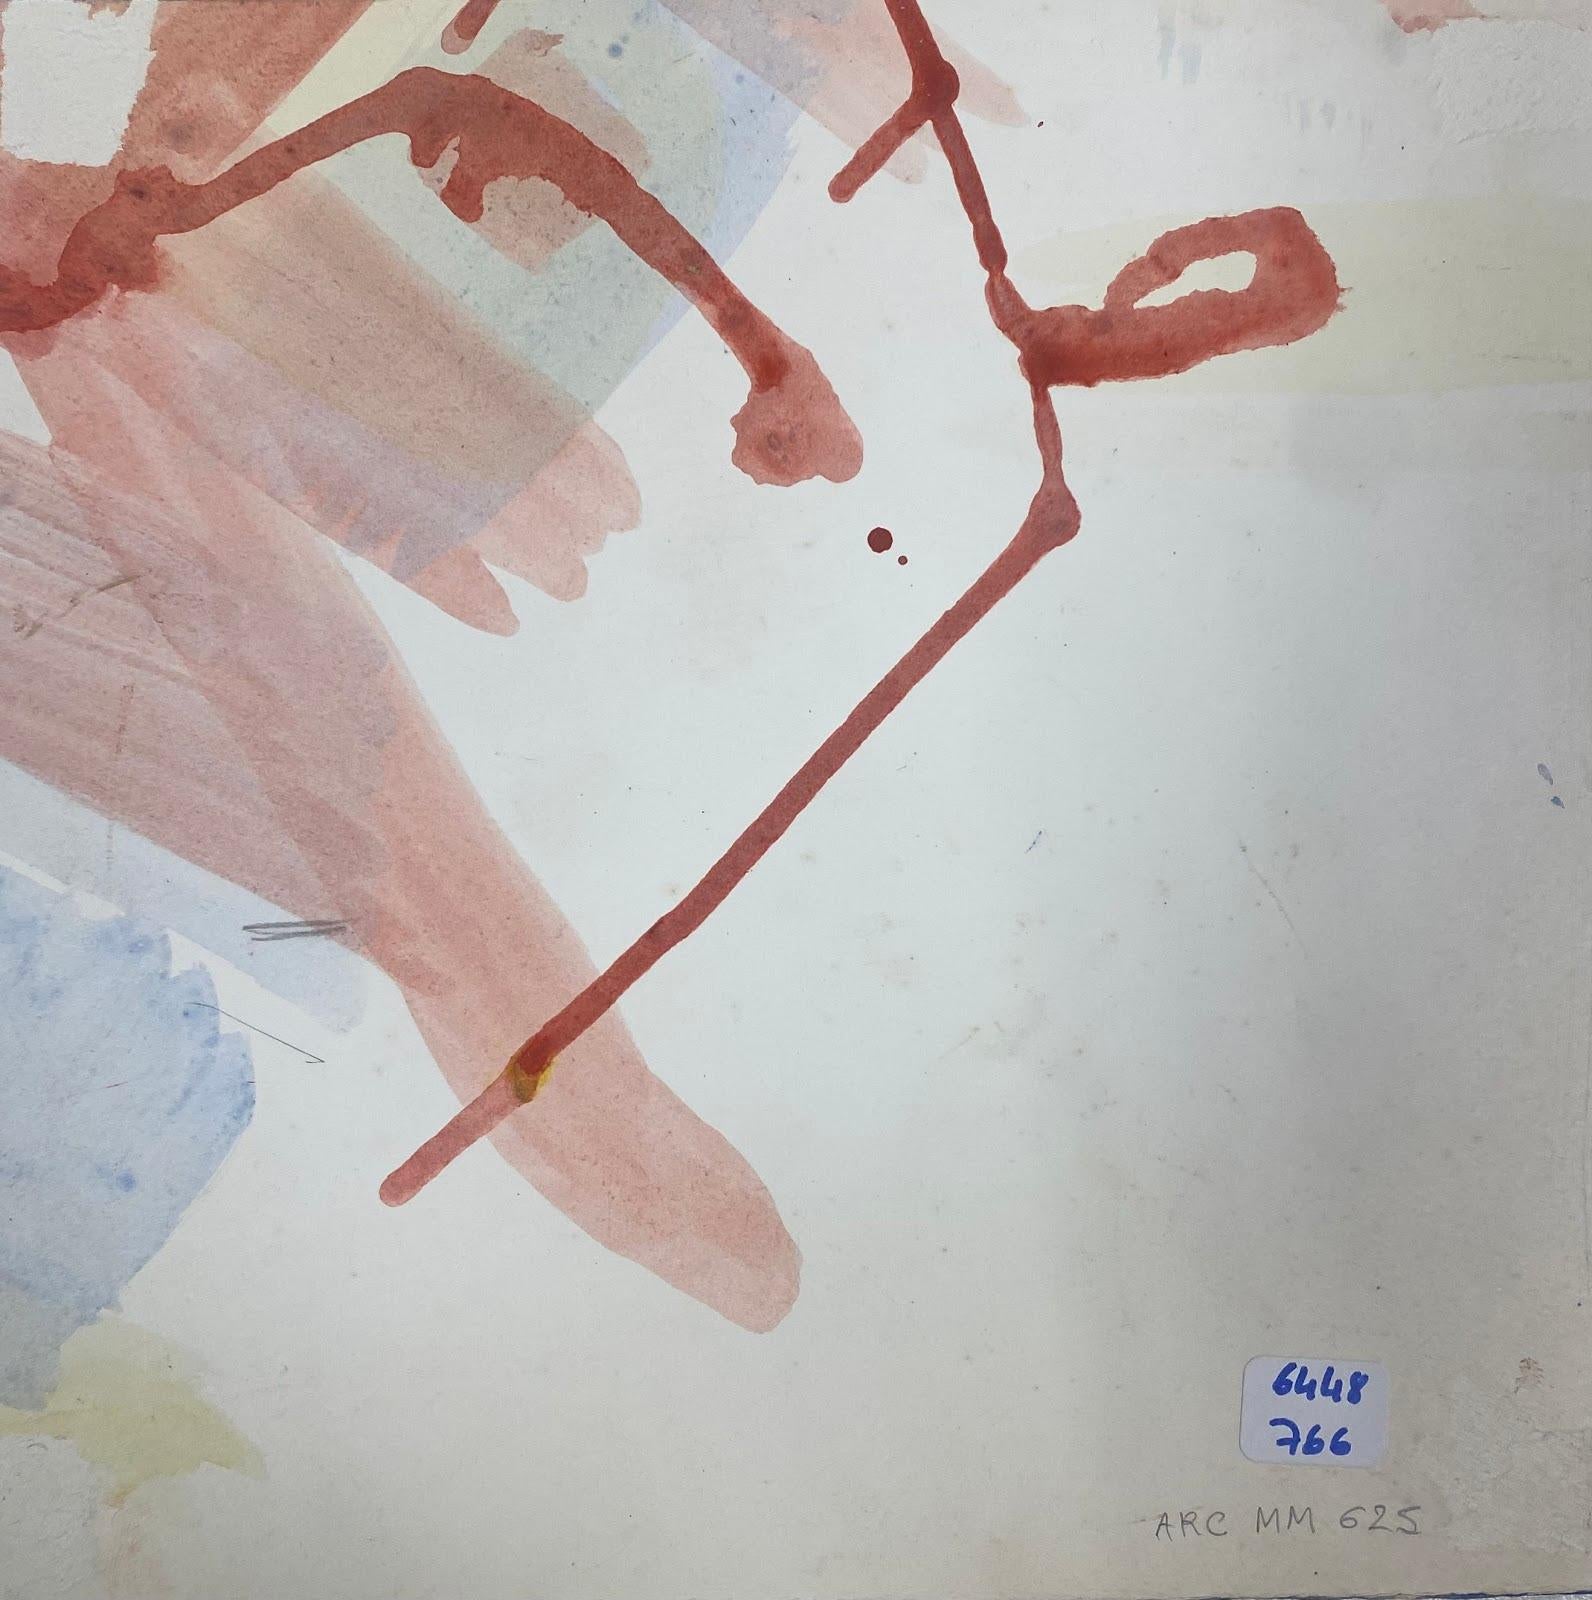 Abstract Expressionist Composition
by Jacques COULAIS (1955-2011)
gouache painting on paper/ card
unframed: 9.5 x 9.5 inches
condition: excellent
provenance: all the paintings we have for sale by this artist have come from the artists studio and are